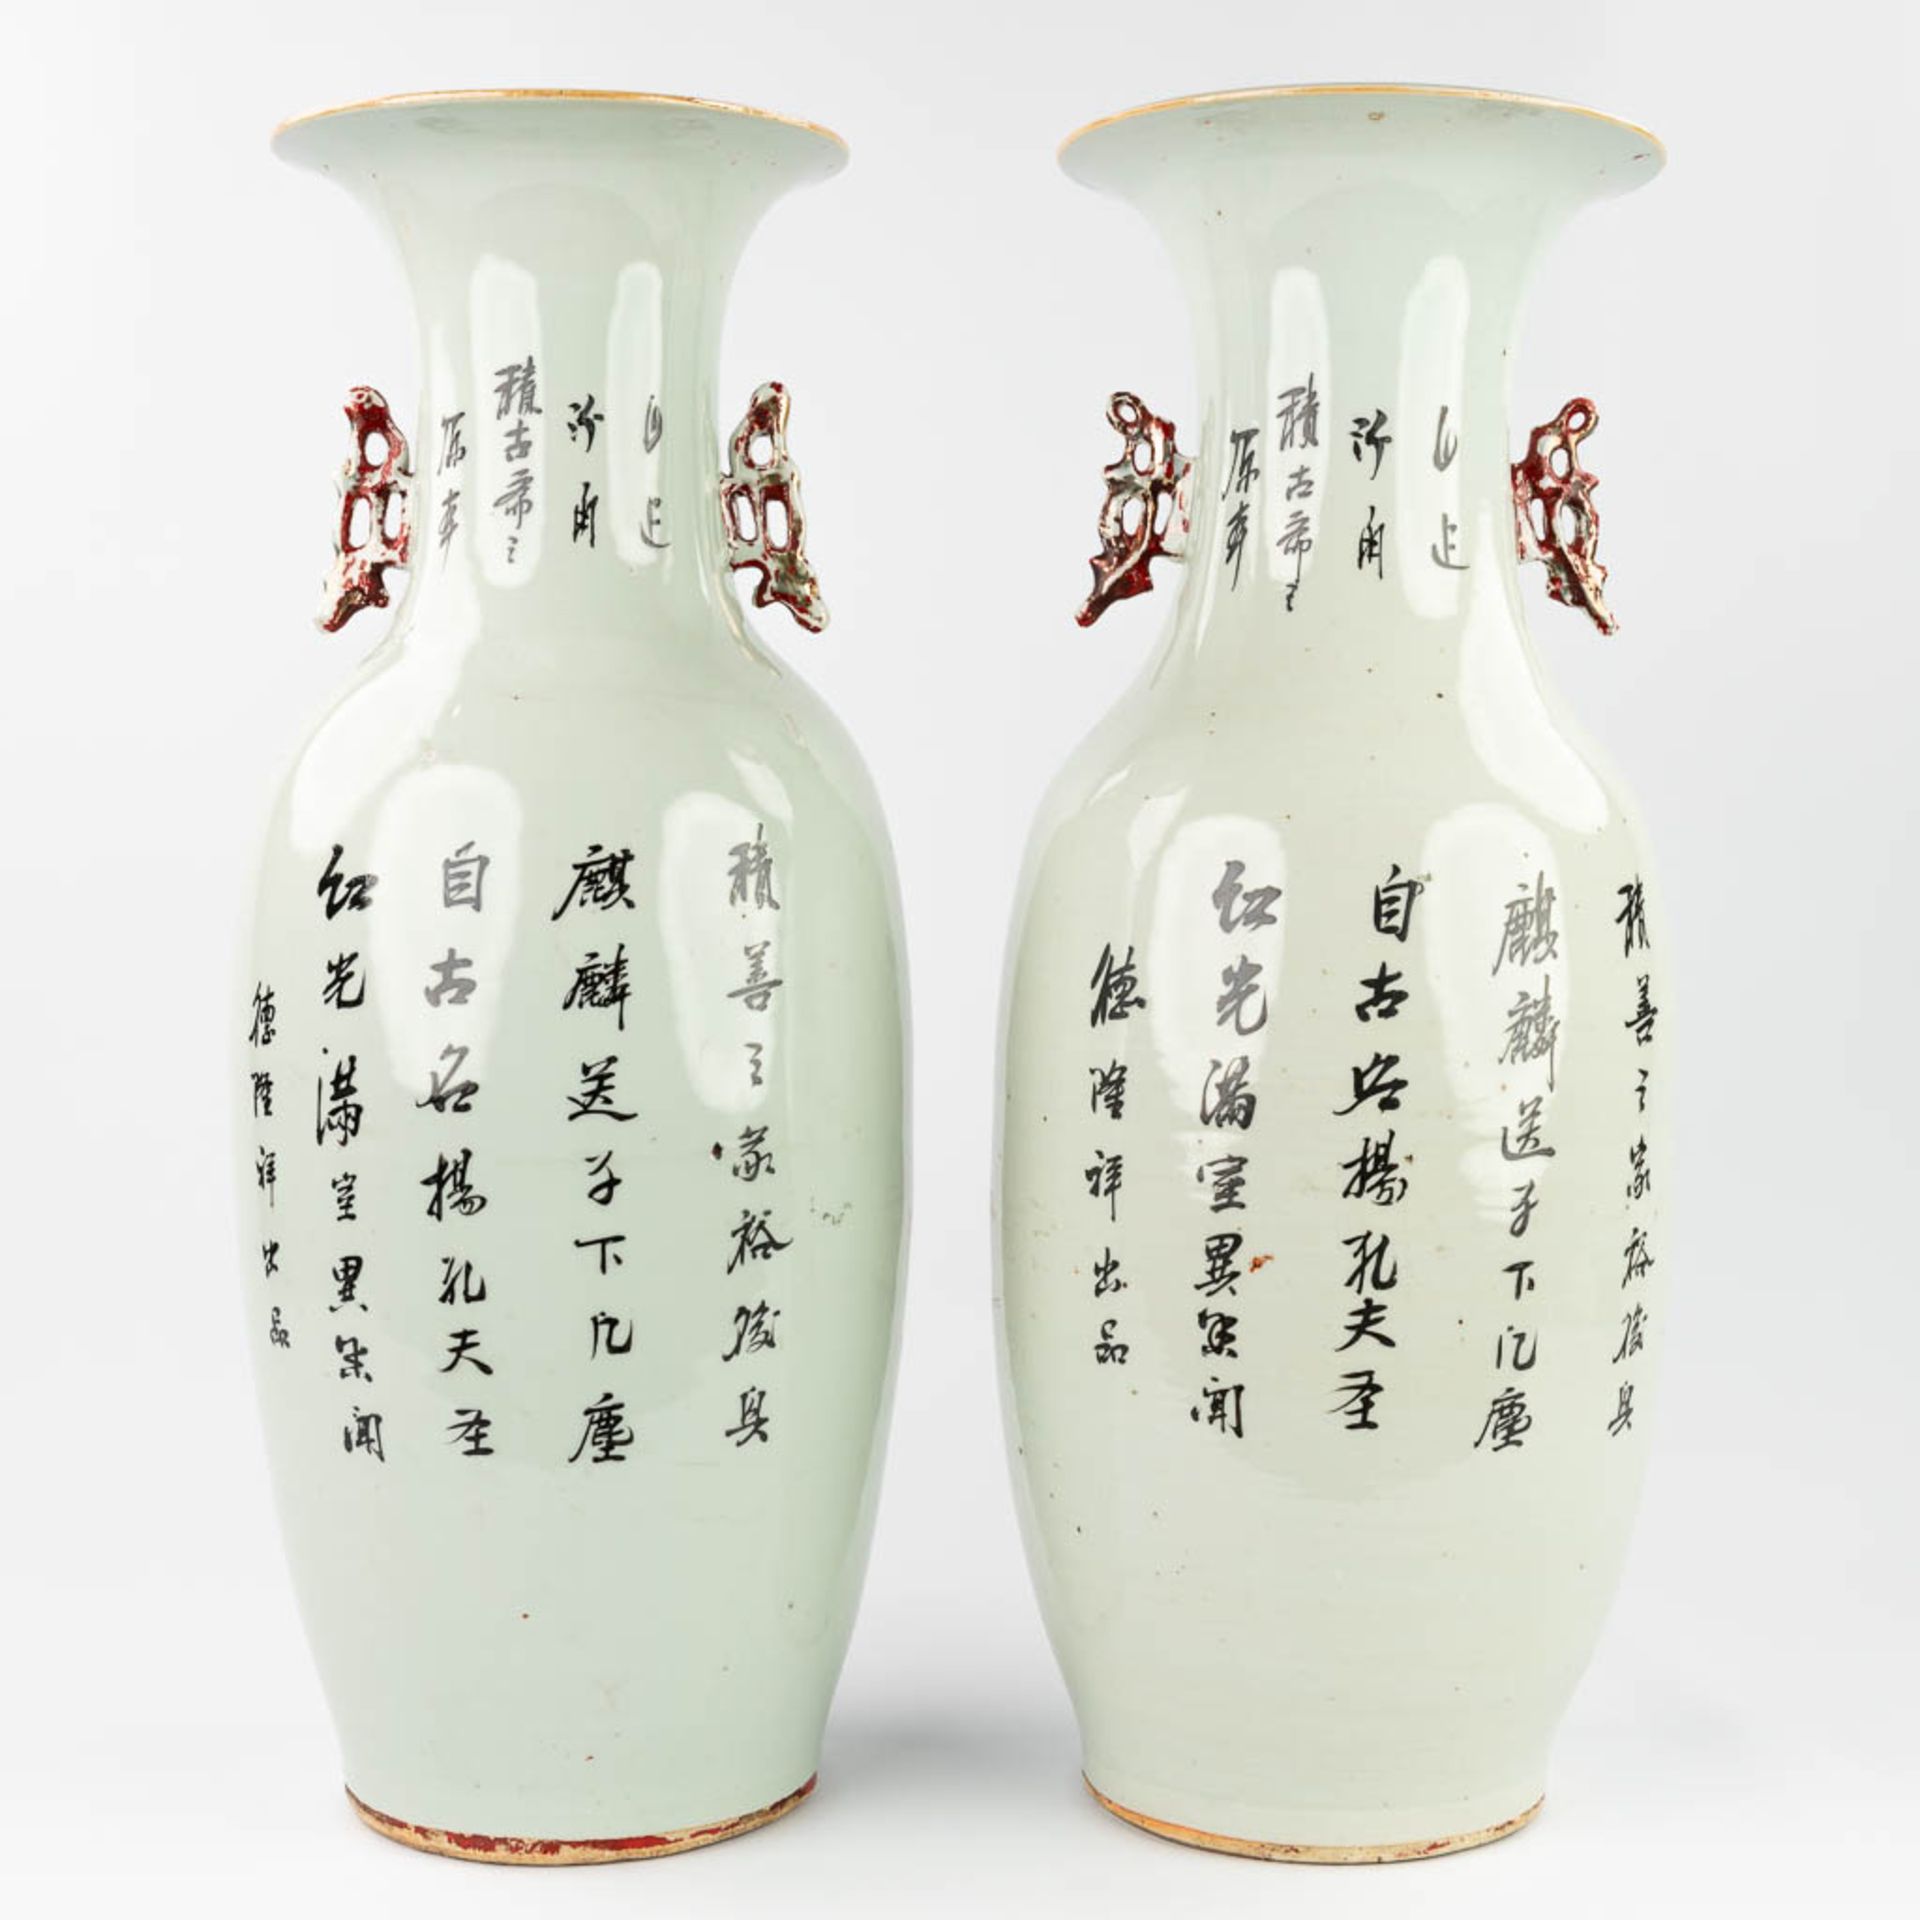 A pair of Chinese vases made of porcelain and decorated with mythological figurines. (58 x 22 cm) - Image 12 of 13